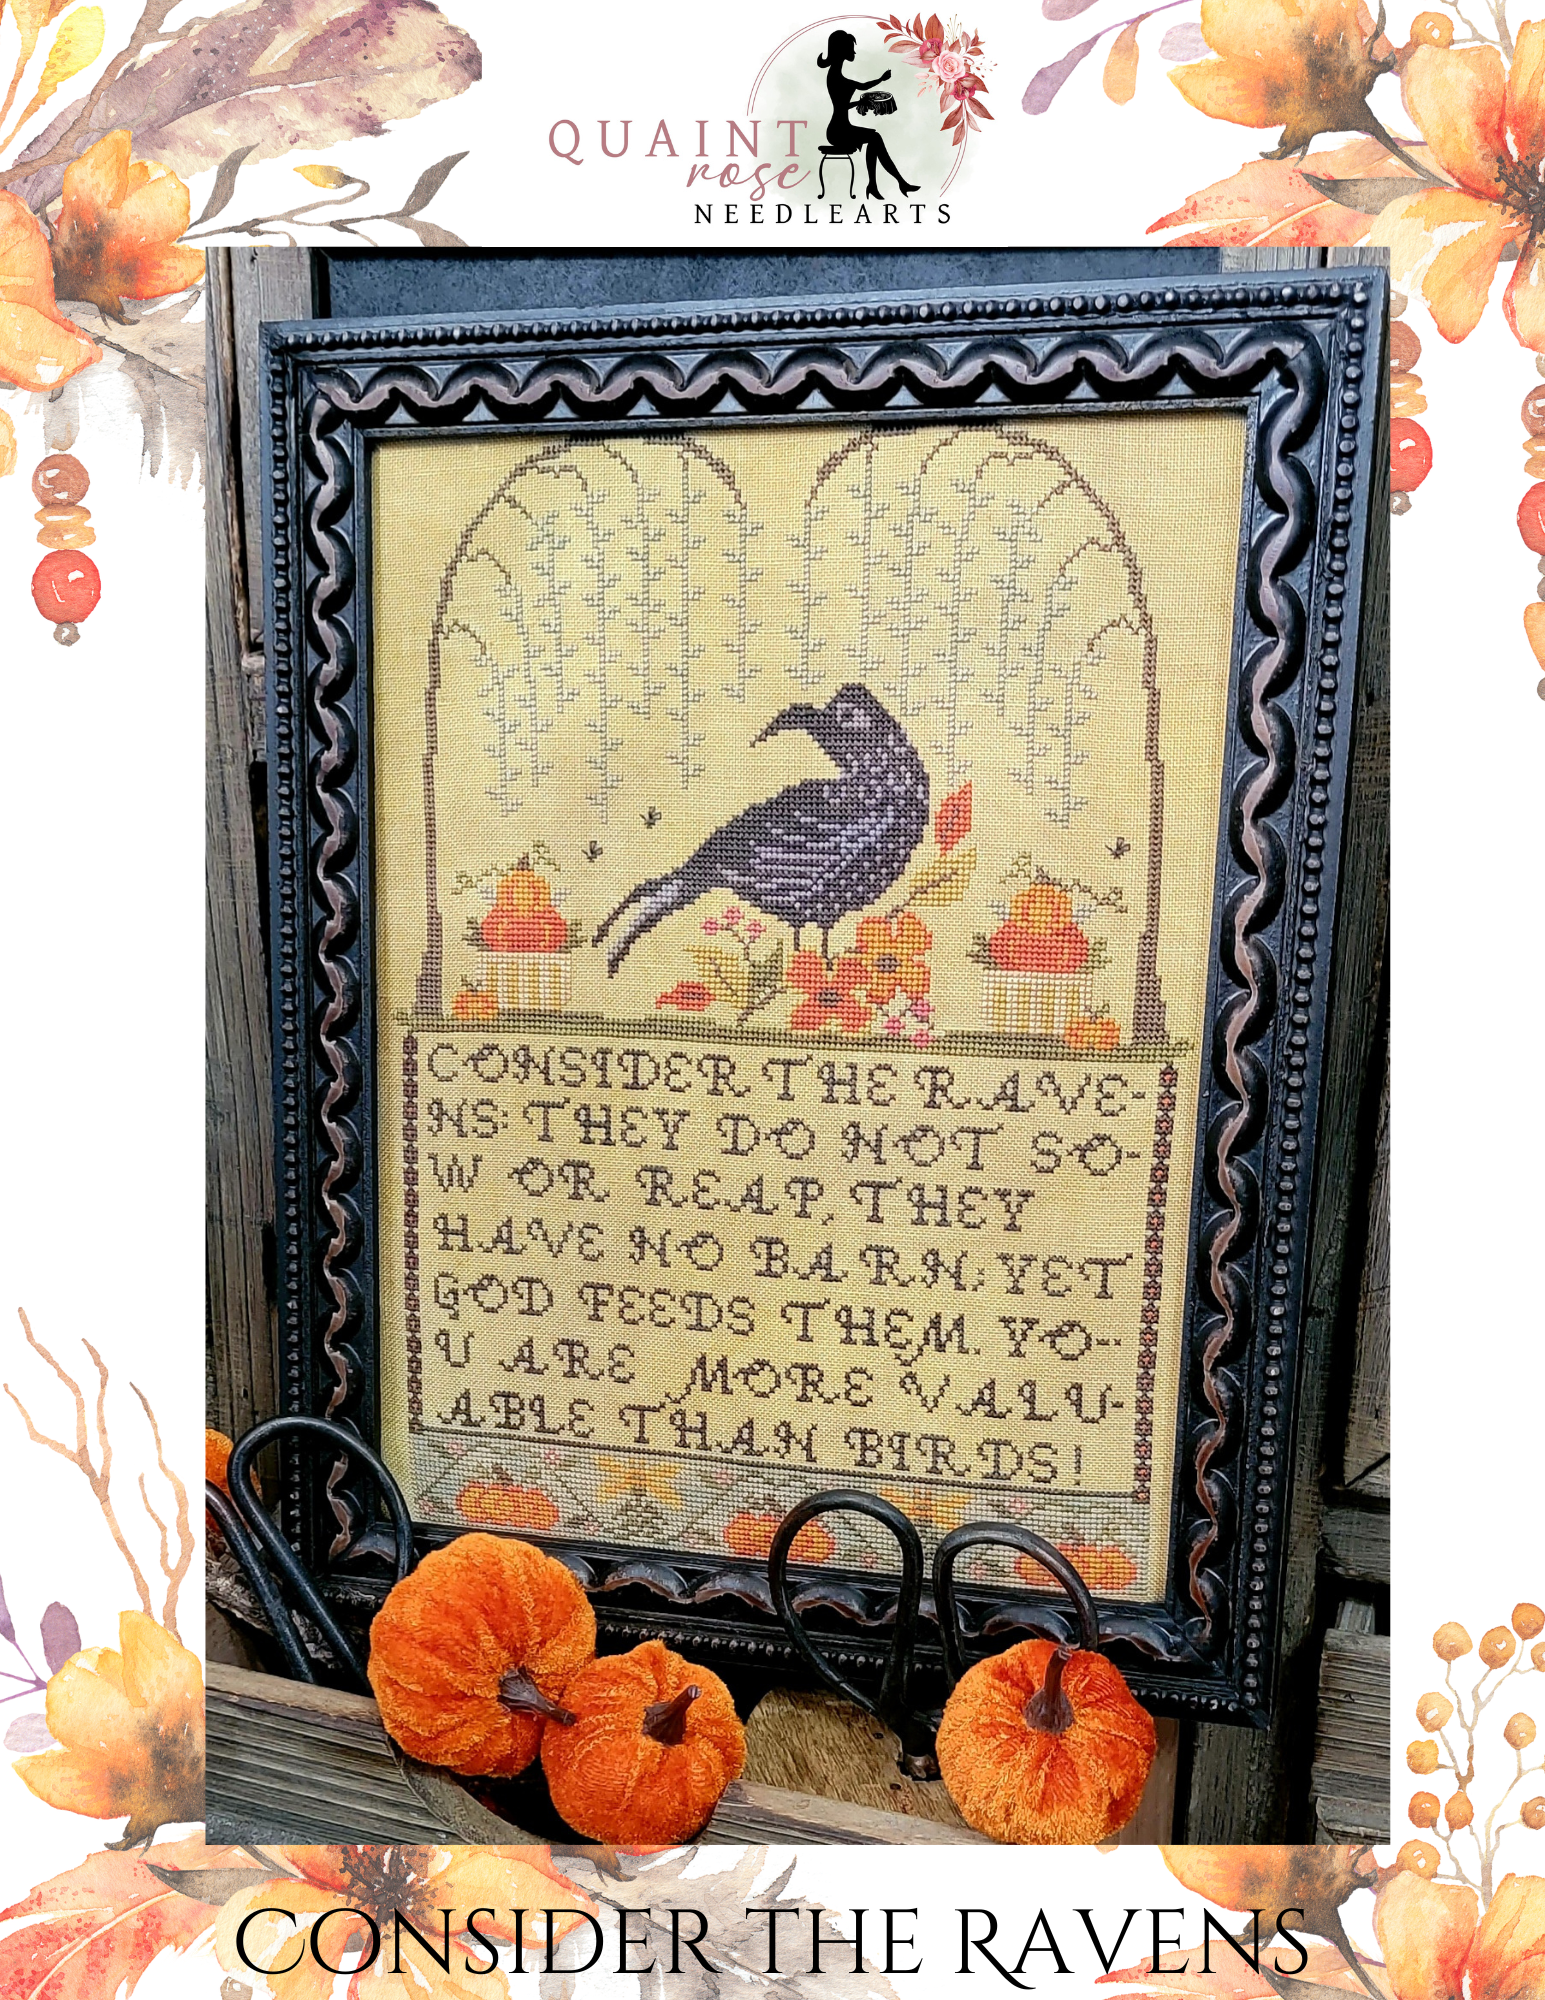 Consider the Ravens - Quaint Rose NeedleArts - Cross Stitch Patterns, The Crafty Grimalkin - A Cross Stitch Store